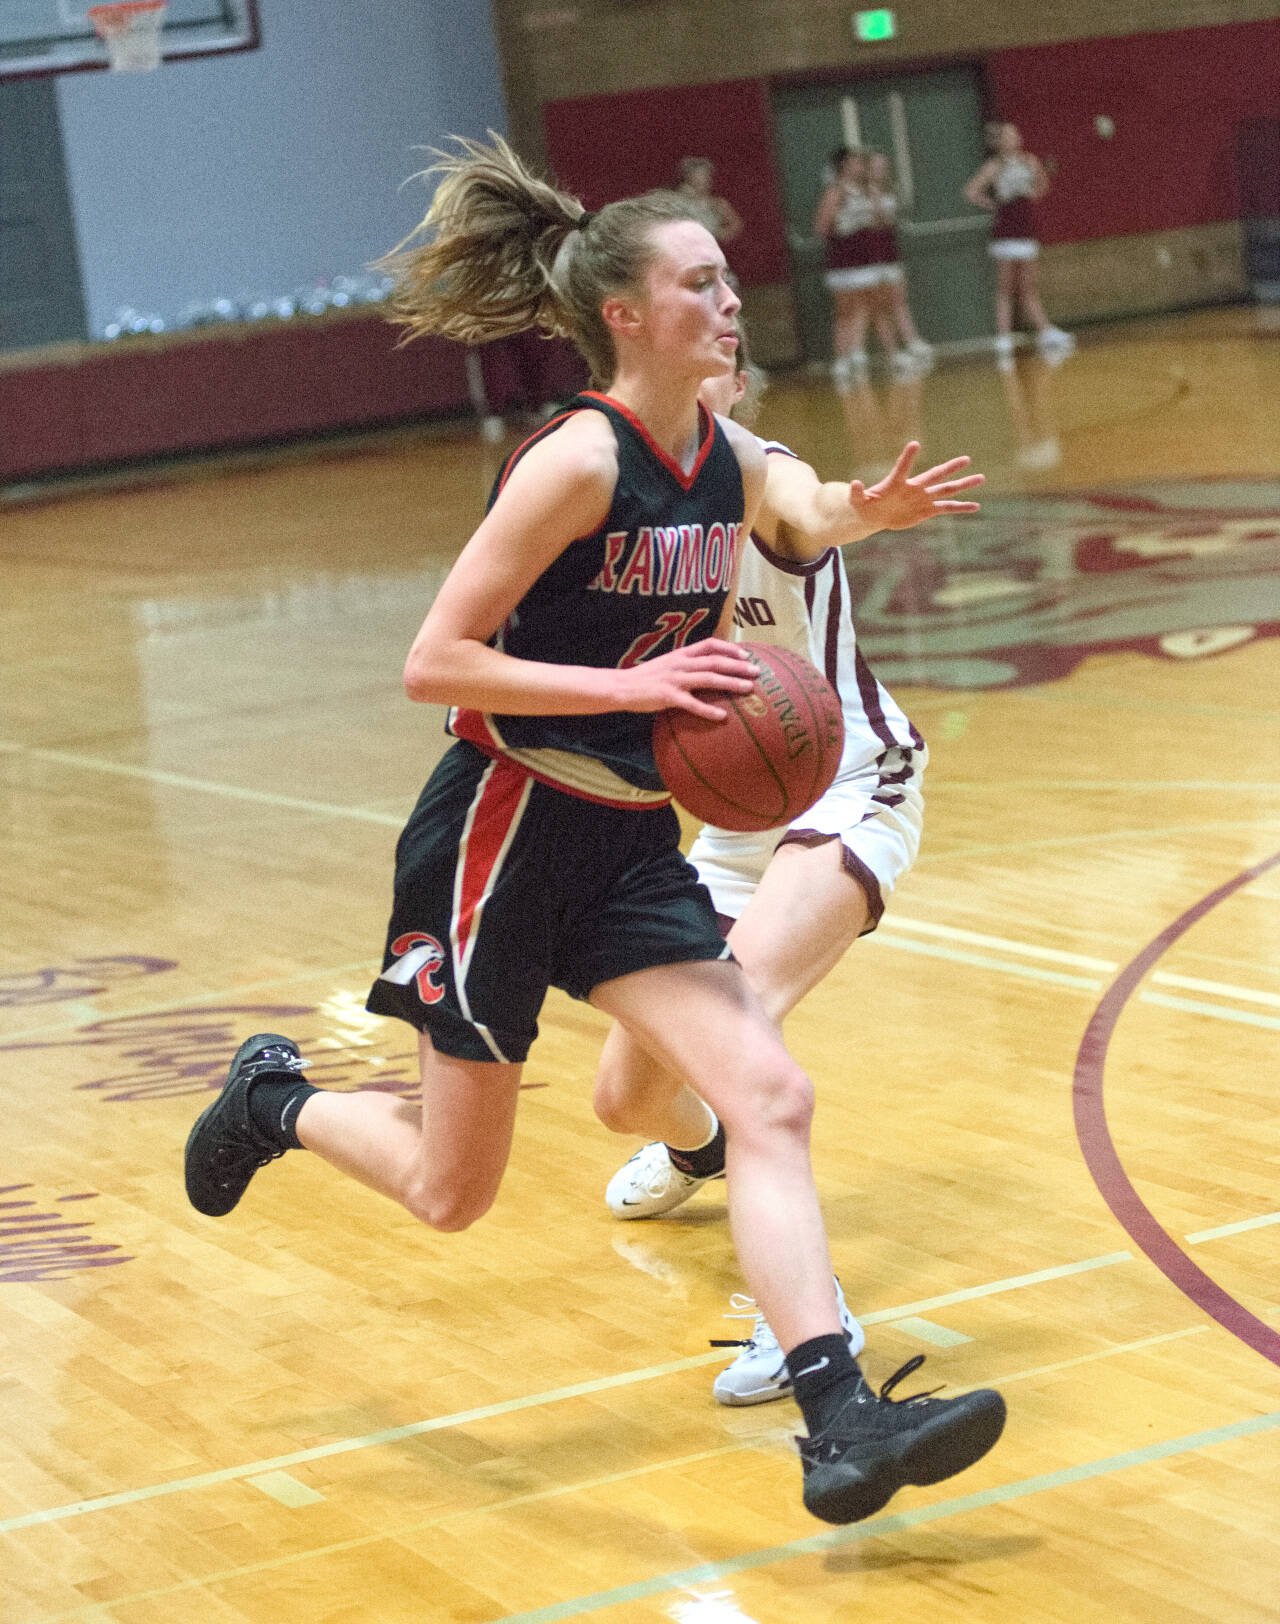 DAILY WORLD FILE PHOTO Raymond guard Kyra Gardner, seen here in a file photo, scored 37 points, grabbed 18 rebounds and had 10 steals in a 59-50 win over Chief Leschi on Tuesday.